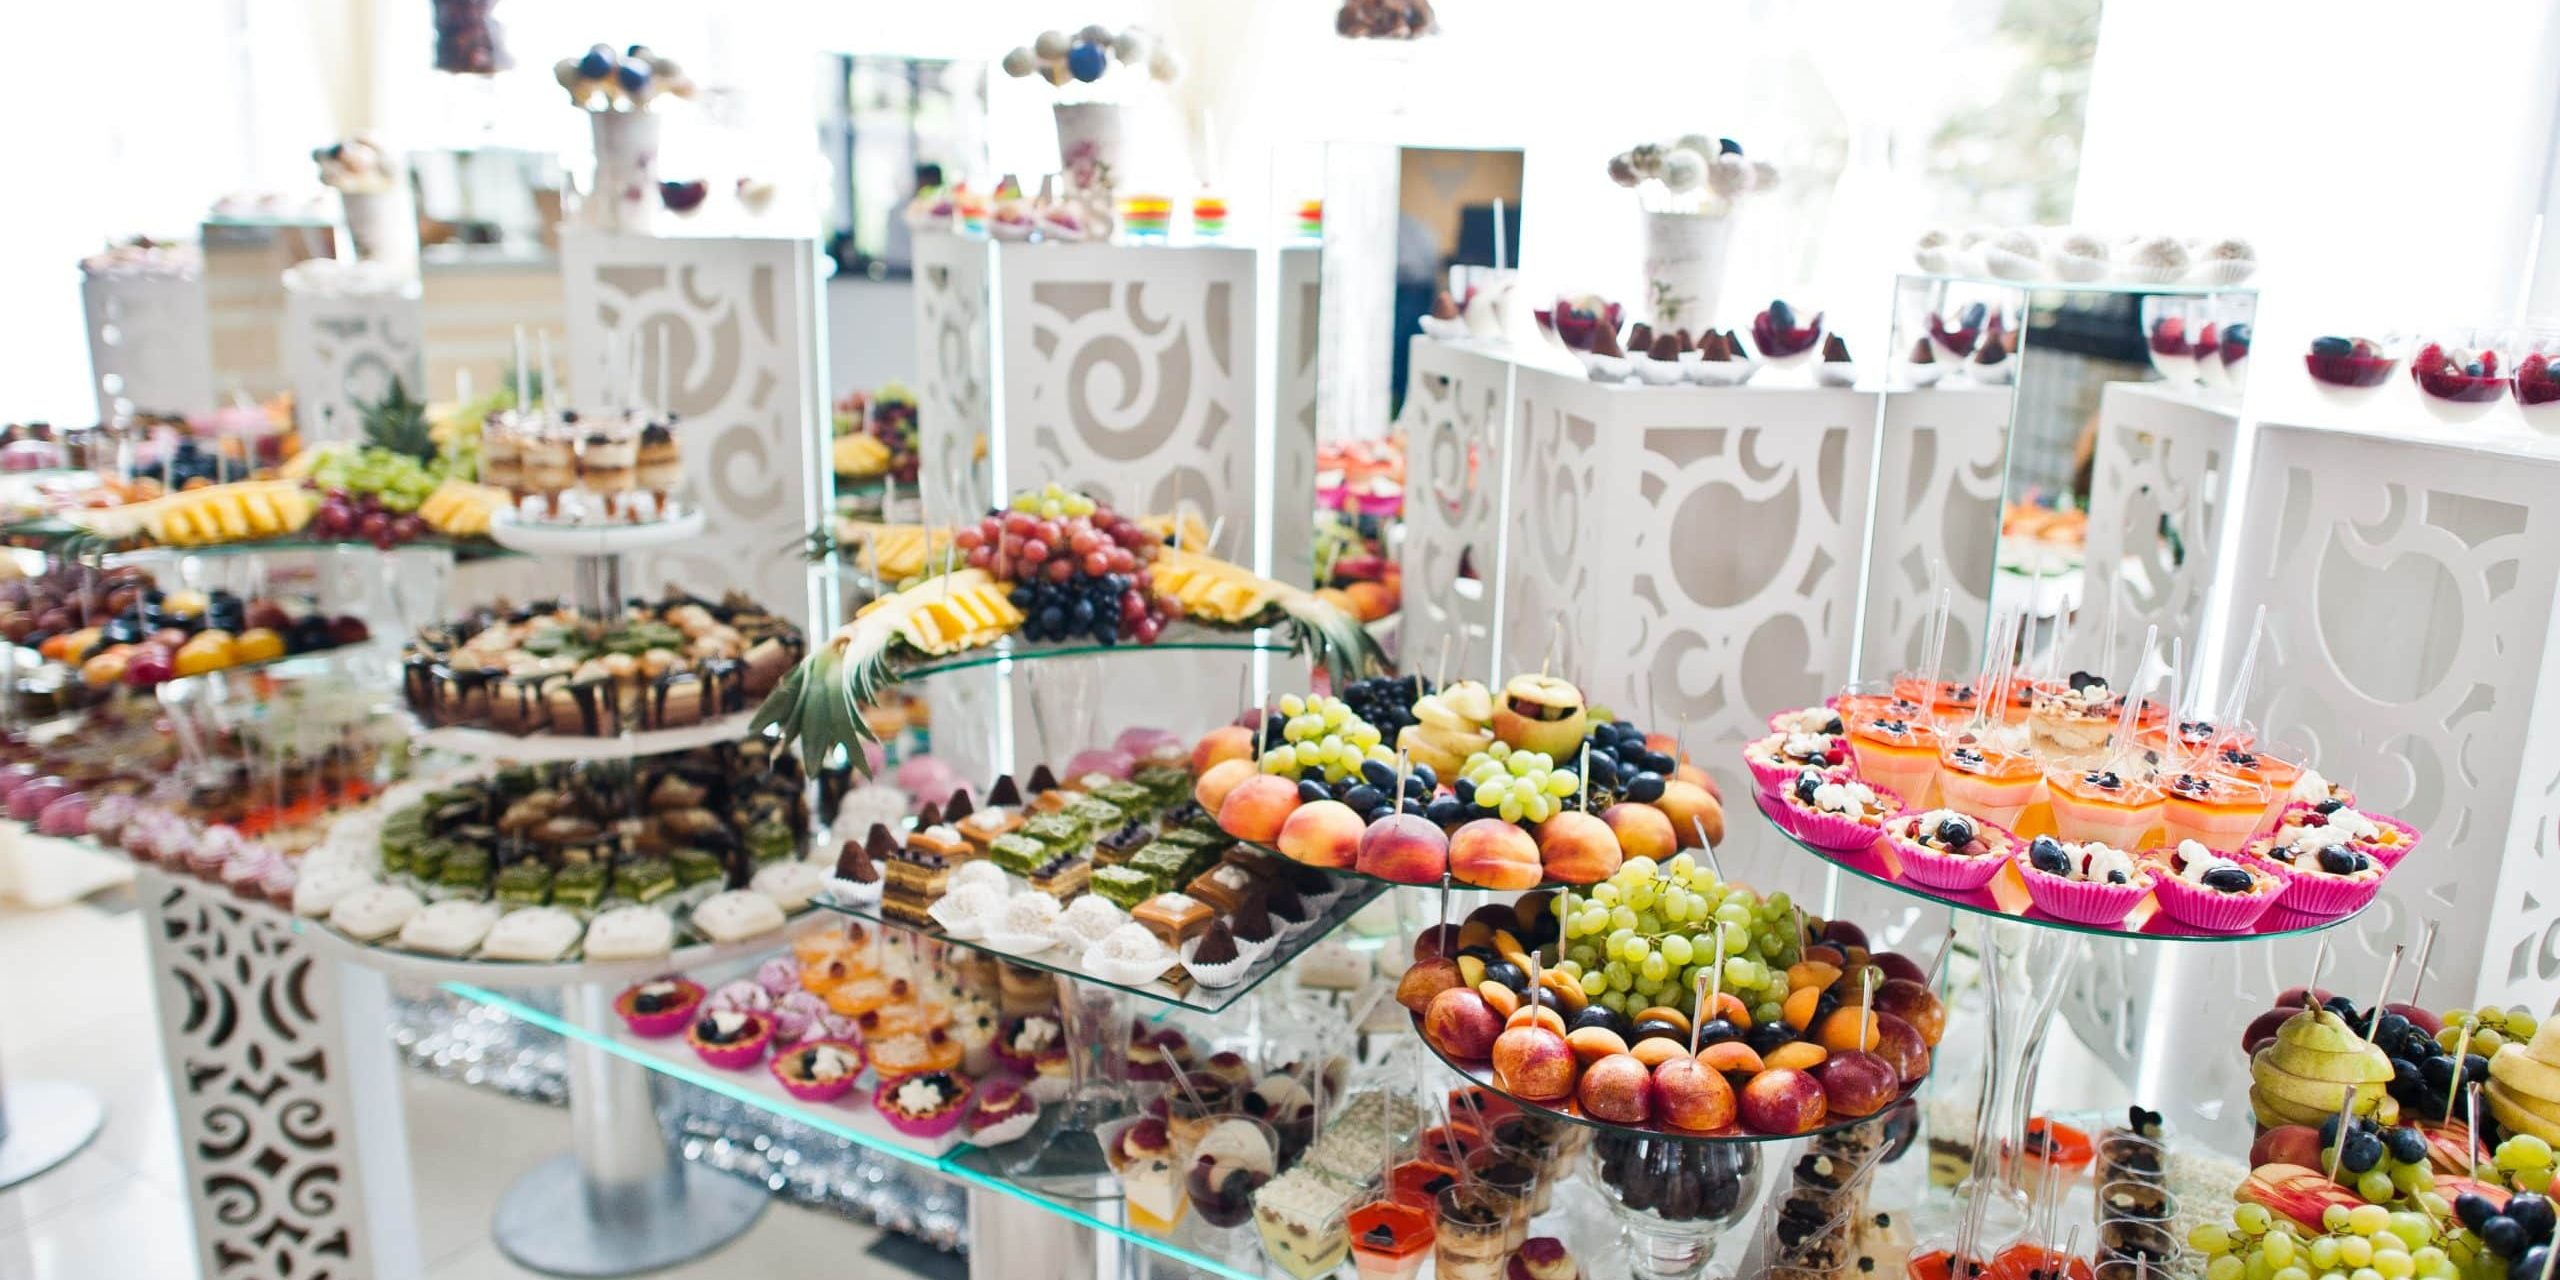 Beautiful wedding candy bar with sweets, fruits and food. Wedding banquet table